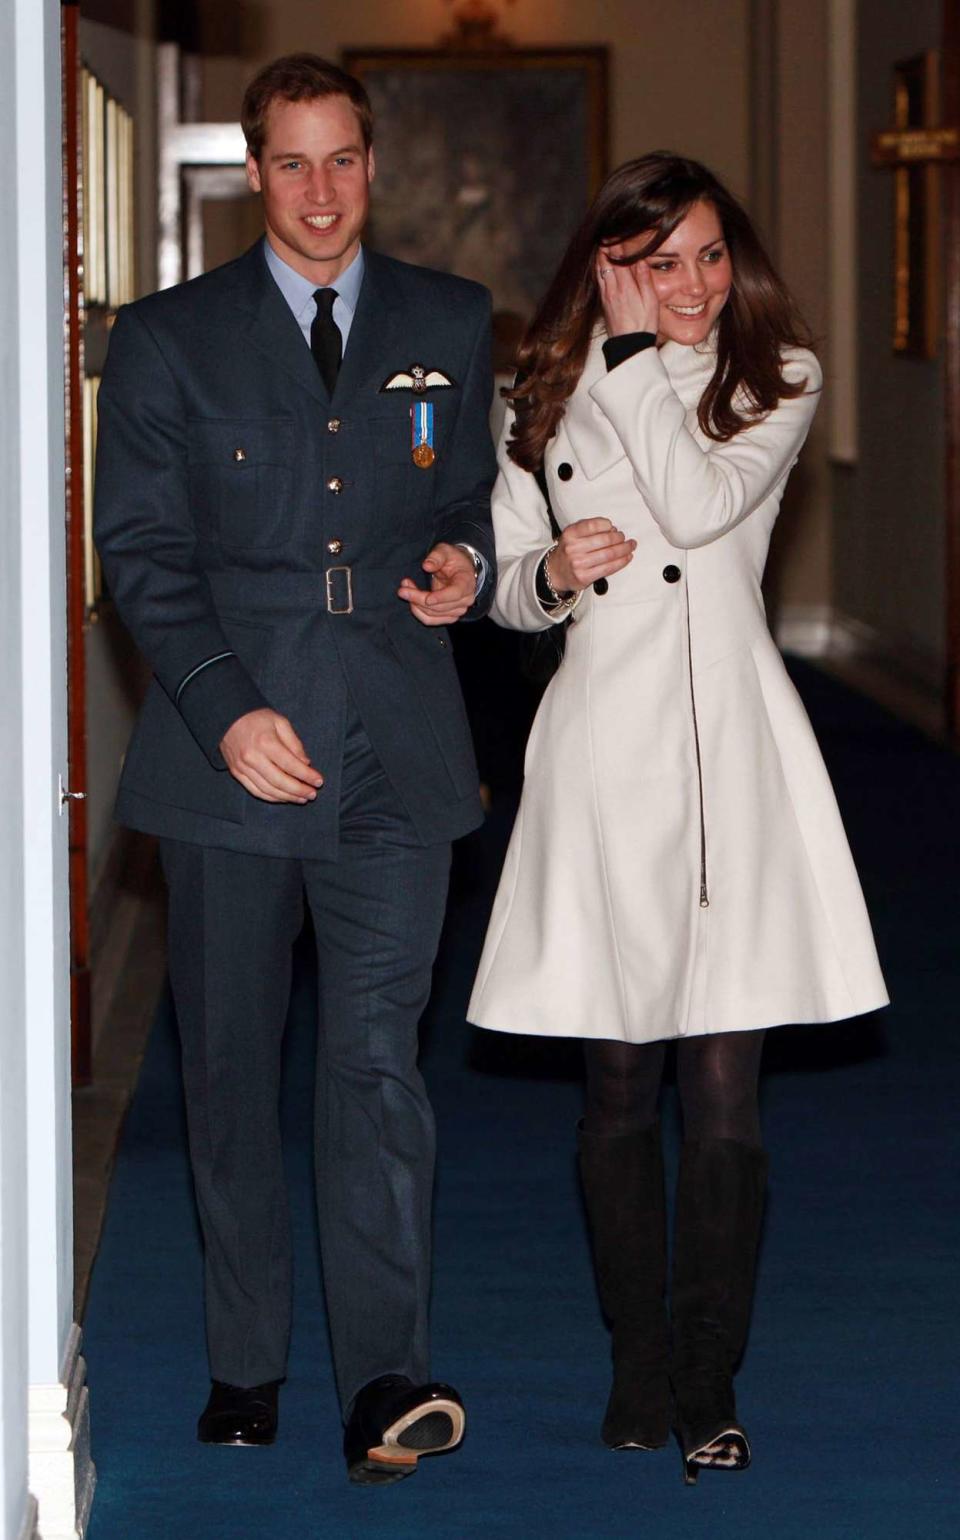 Prince William walks with his girlfriend Kate Middleton after his graduation ceremony at RAF Cranwell on April 11, 2008 in Cranwell, England